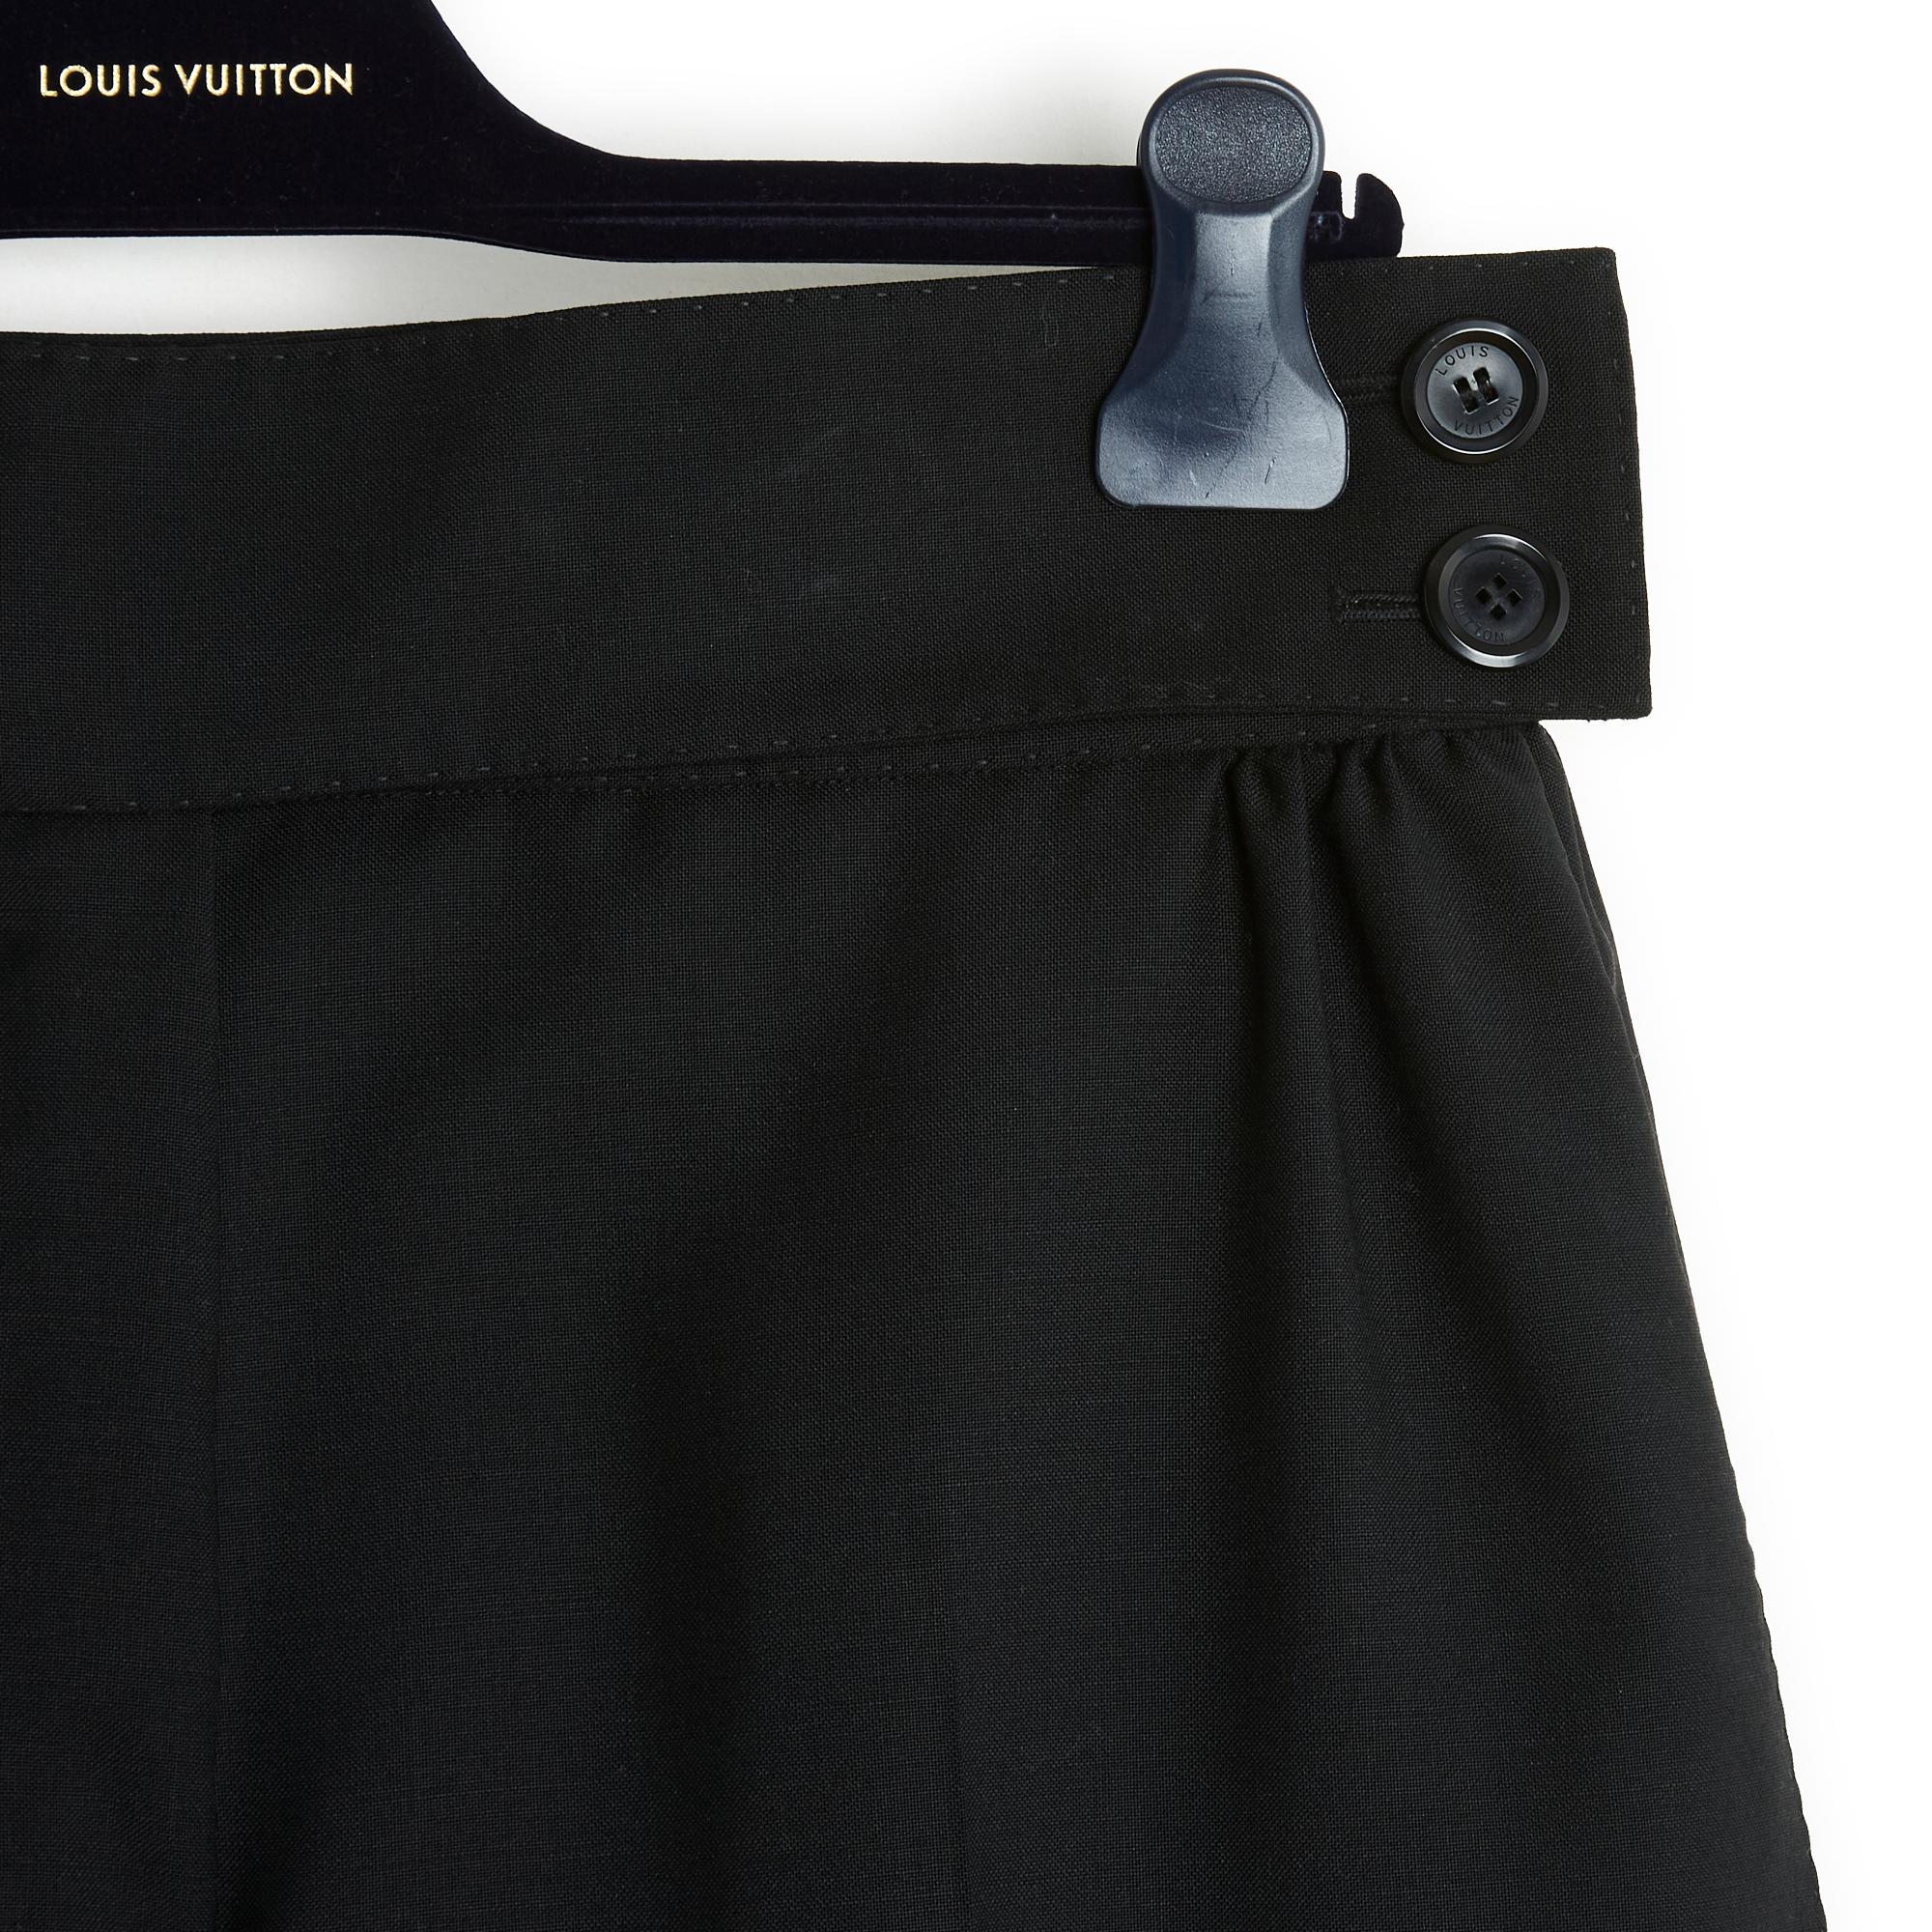 Louis Vuitton pants in black wool twill, extra large volume, high waist with crossed belt and 2 small gathers on each side, 2 slanted slit pockets in front, 2 horizontal slit pockets (always closed) in the back, wide cuff at the bottom of the leg,